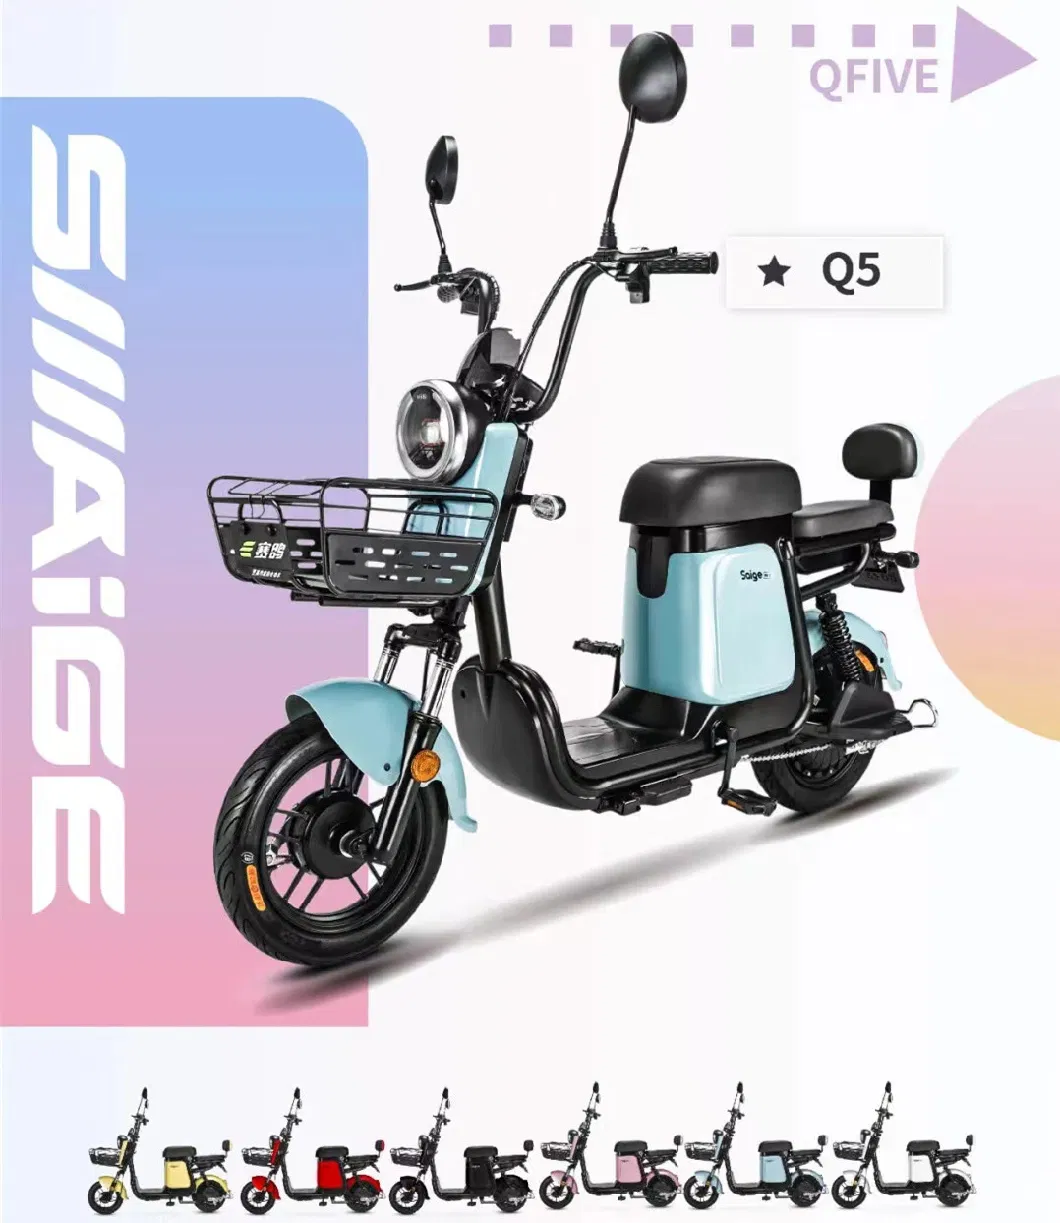 350W Electric Bike Scooters Bicycle Motor Bike Moped for Teenagers